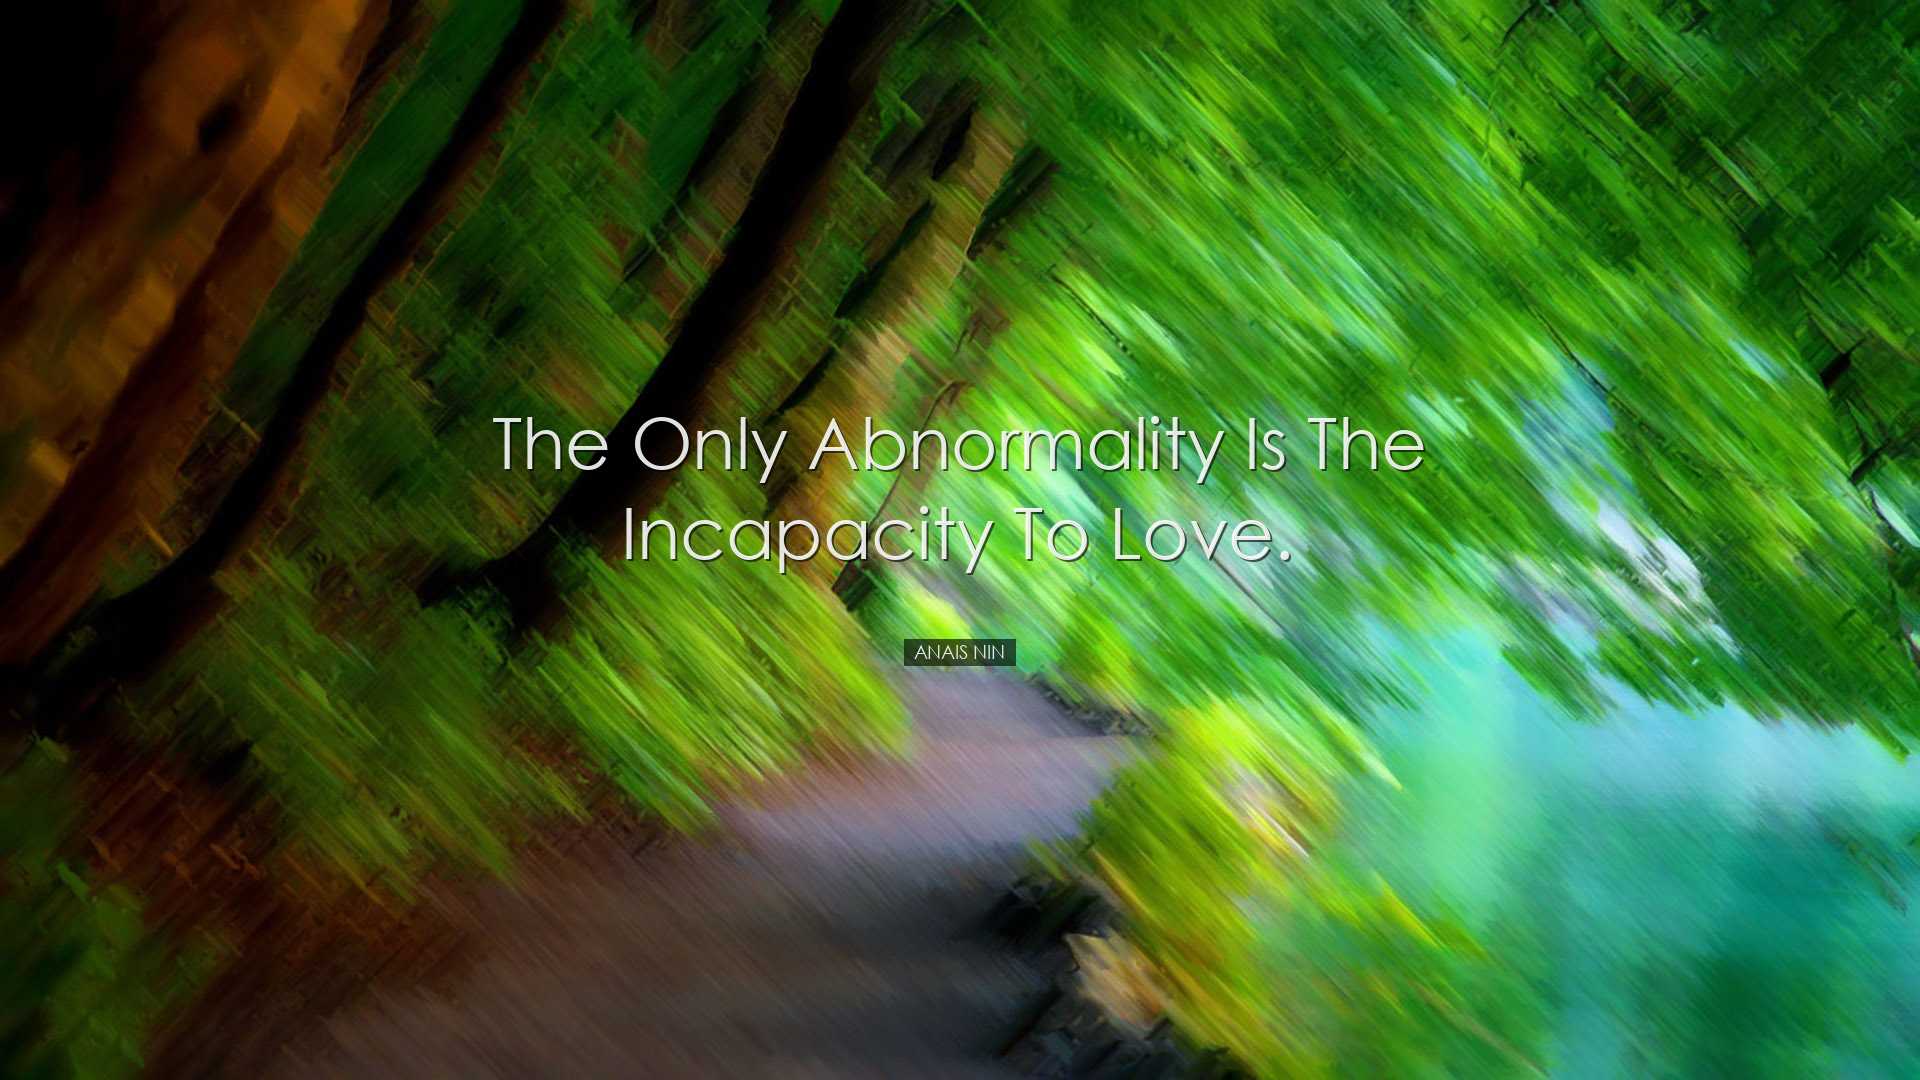 The only abnormality is the incapacity to love. - Anais Nin